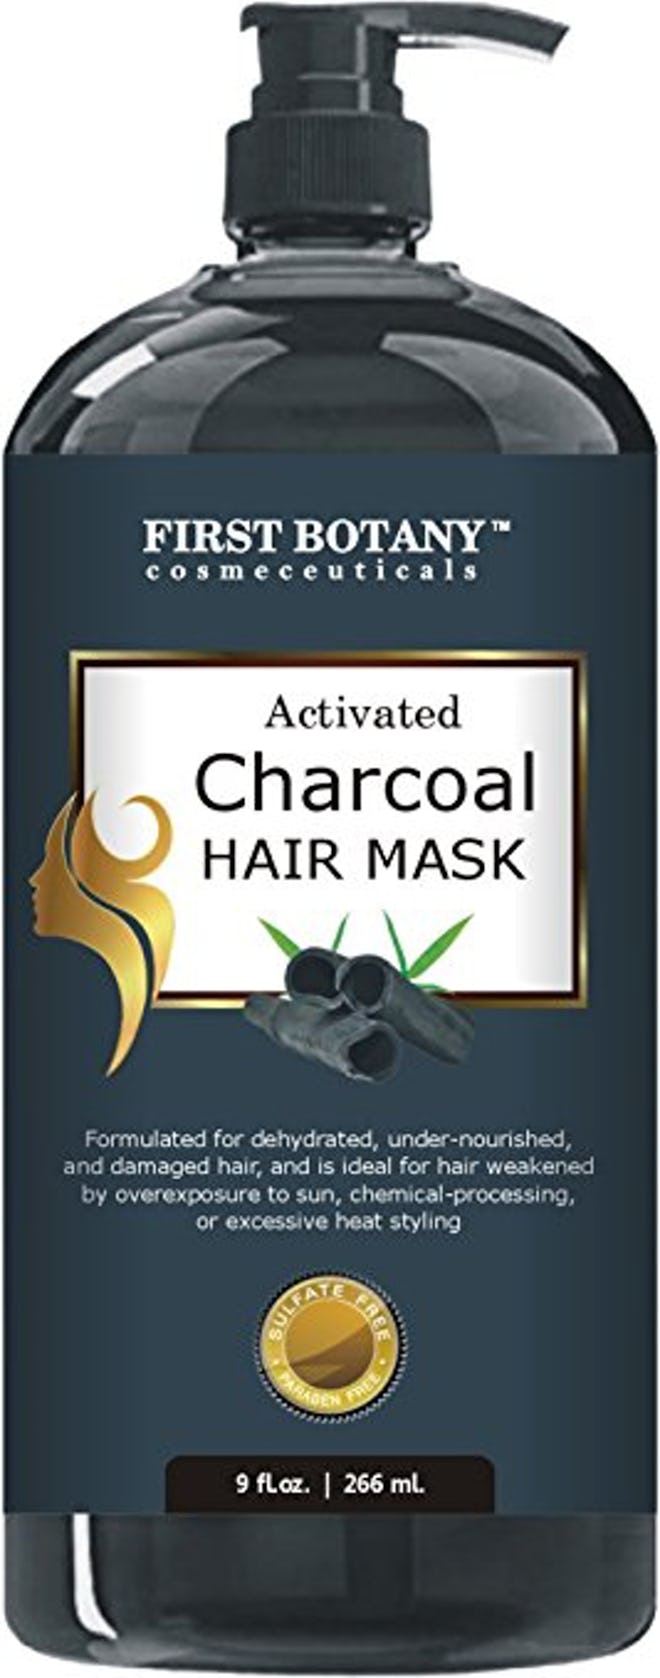 First Botany Cosmeceuticals Activated Charcoal Hair Mask